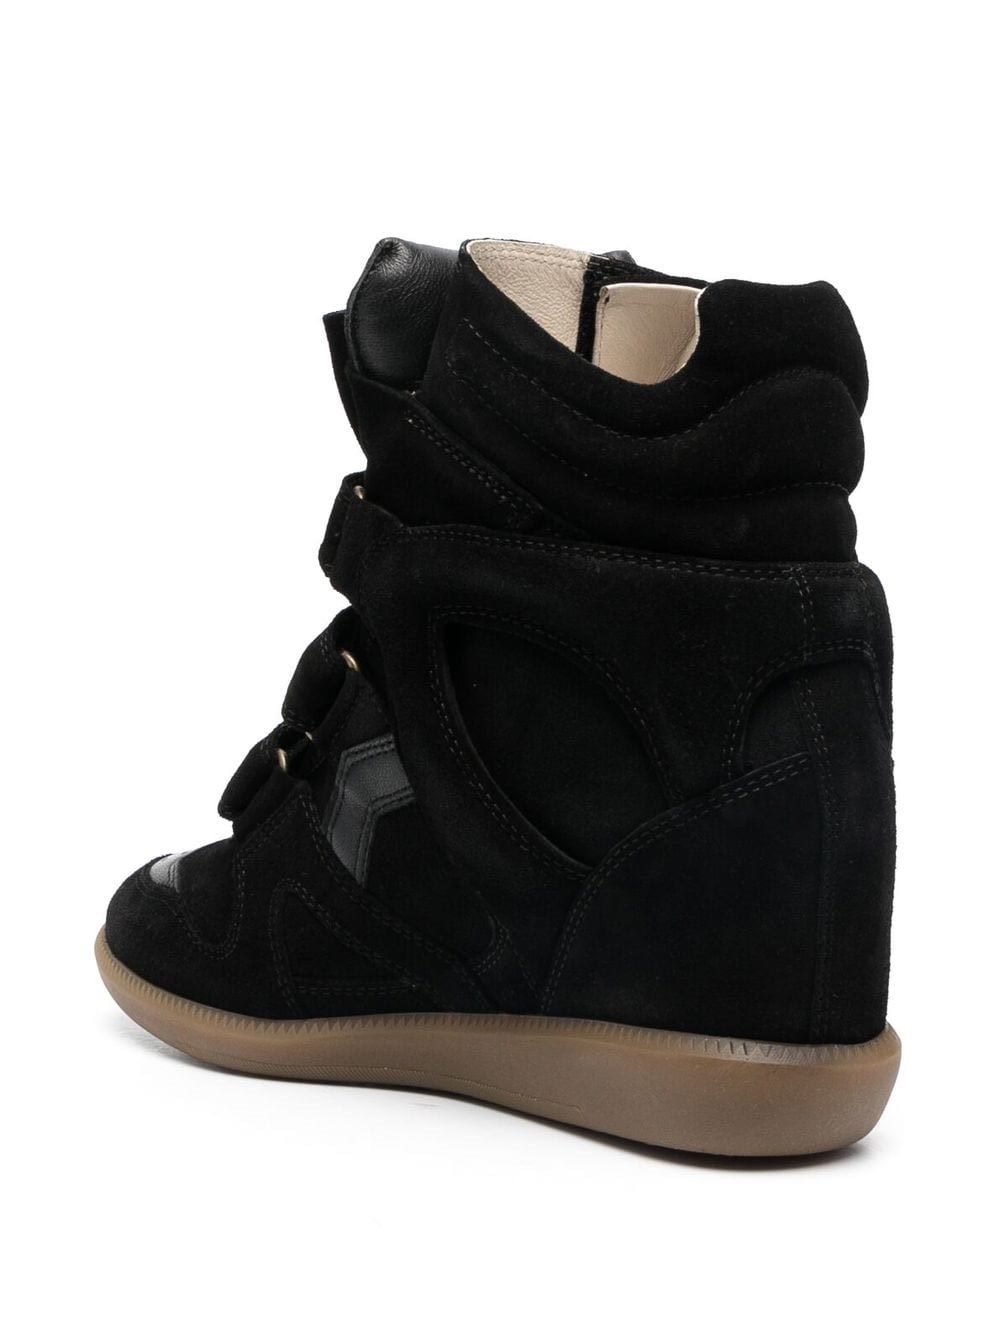 isabel marant BEKETT SNEAKERS available on montiboutique.com -